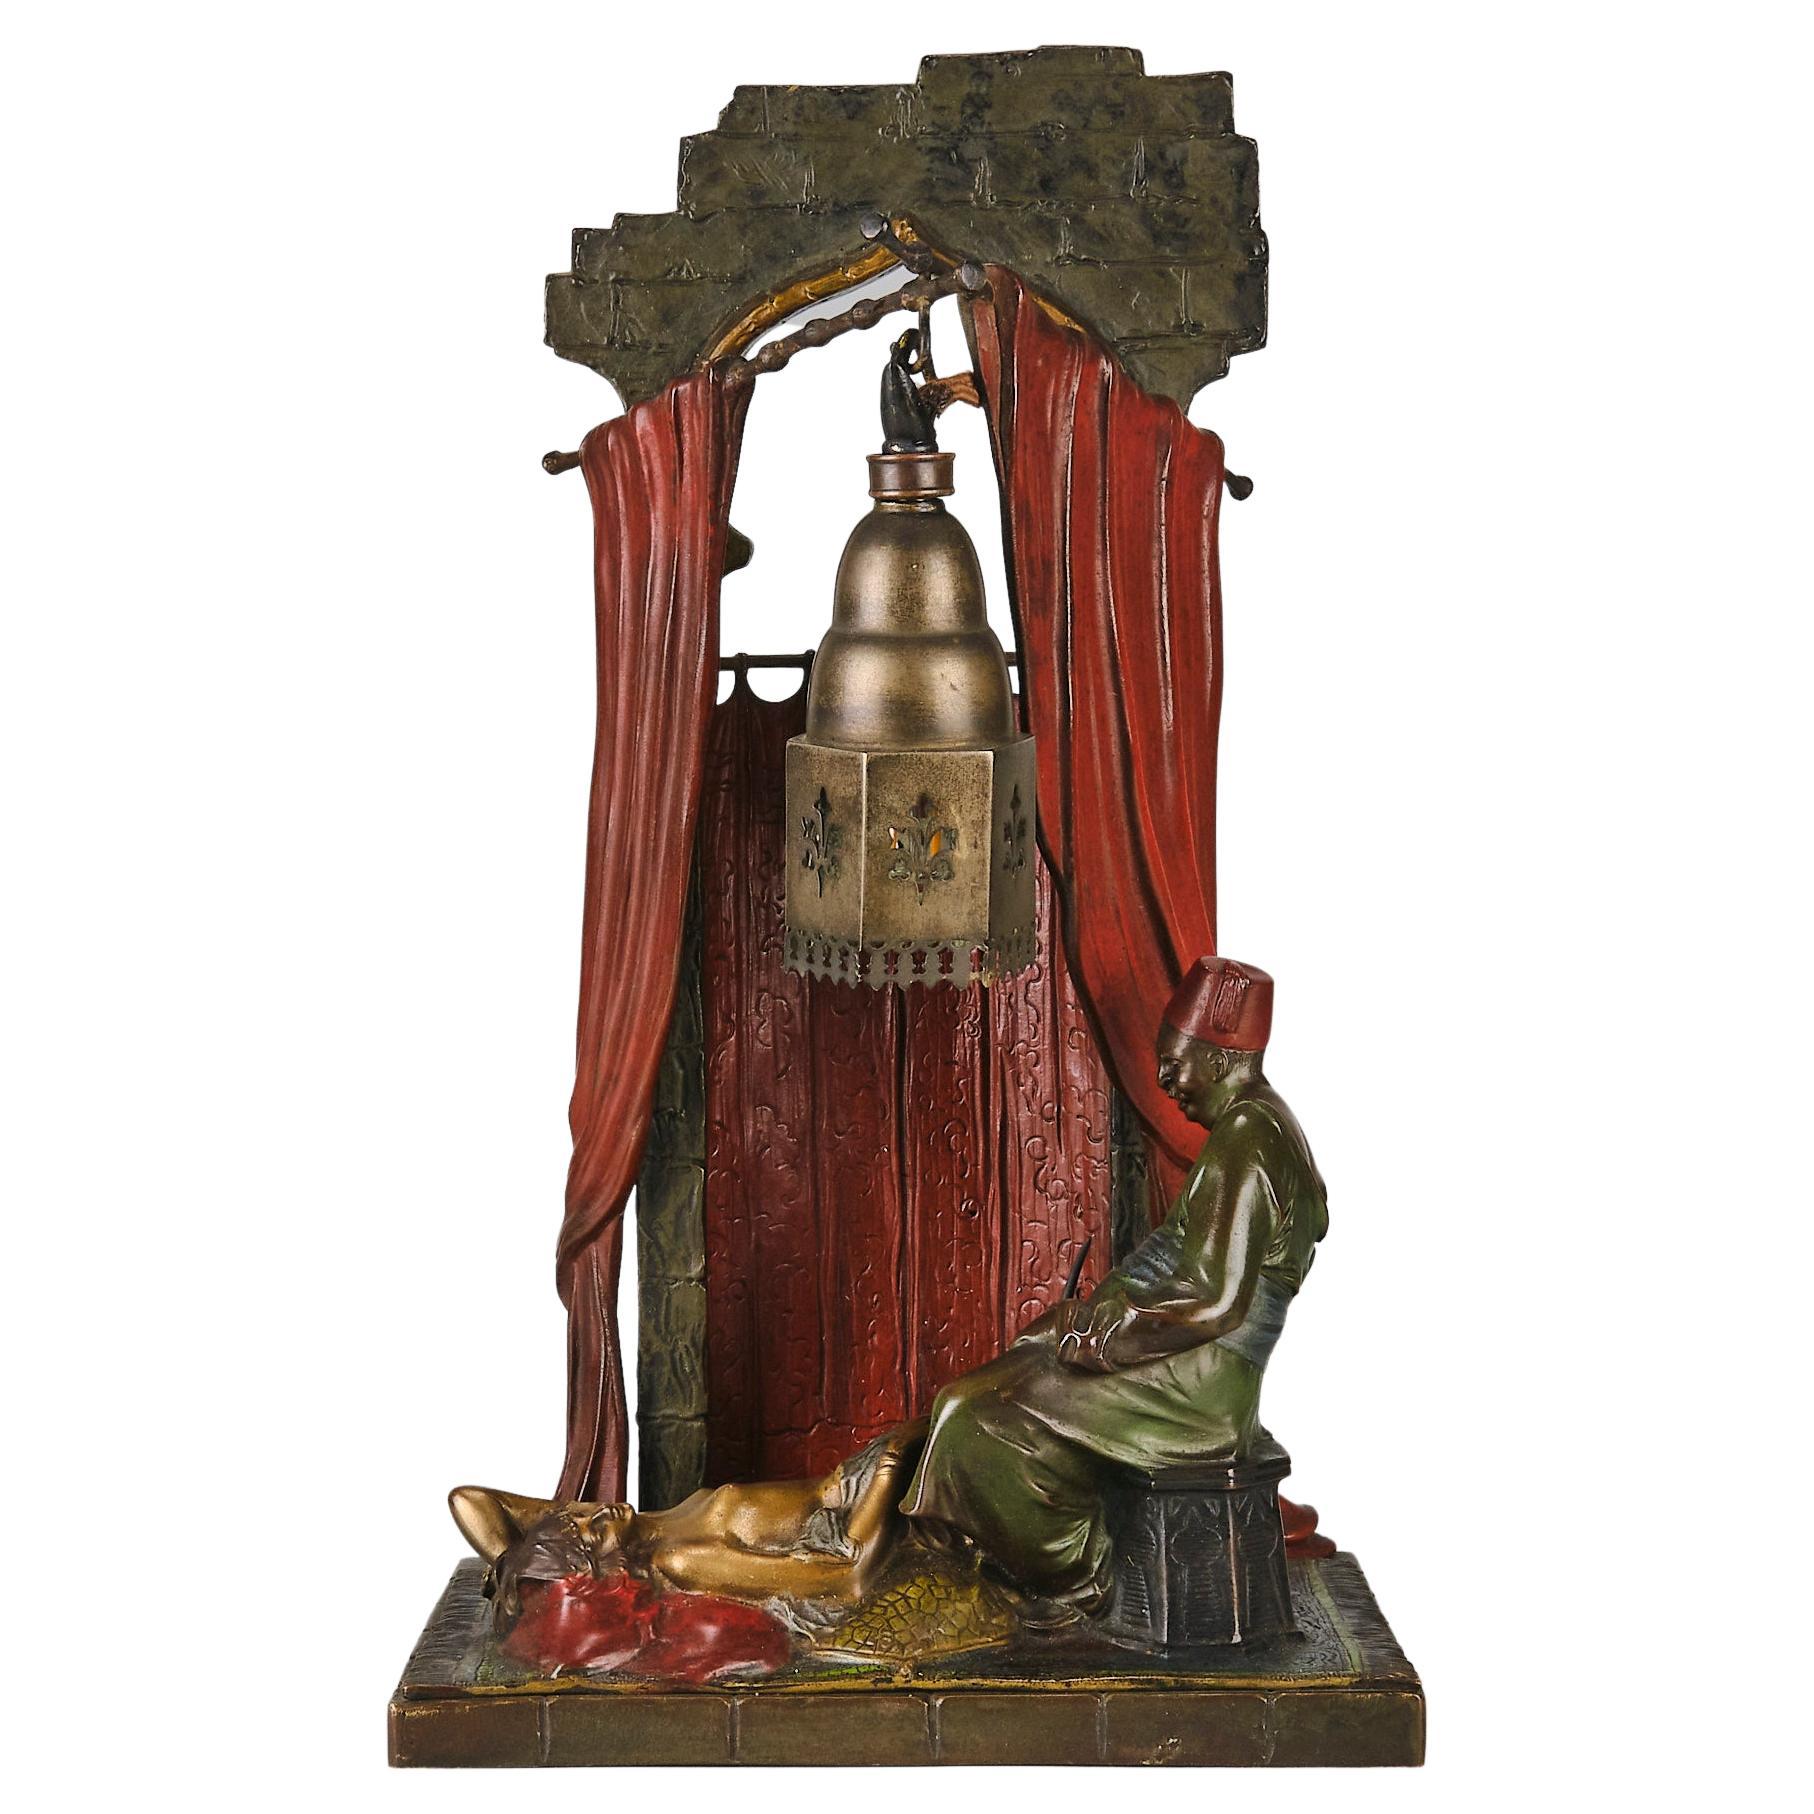  Early 20th Century Cold-Painted Bronze Entitled "Harem Lamp" by Bruno Zach